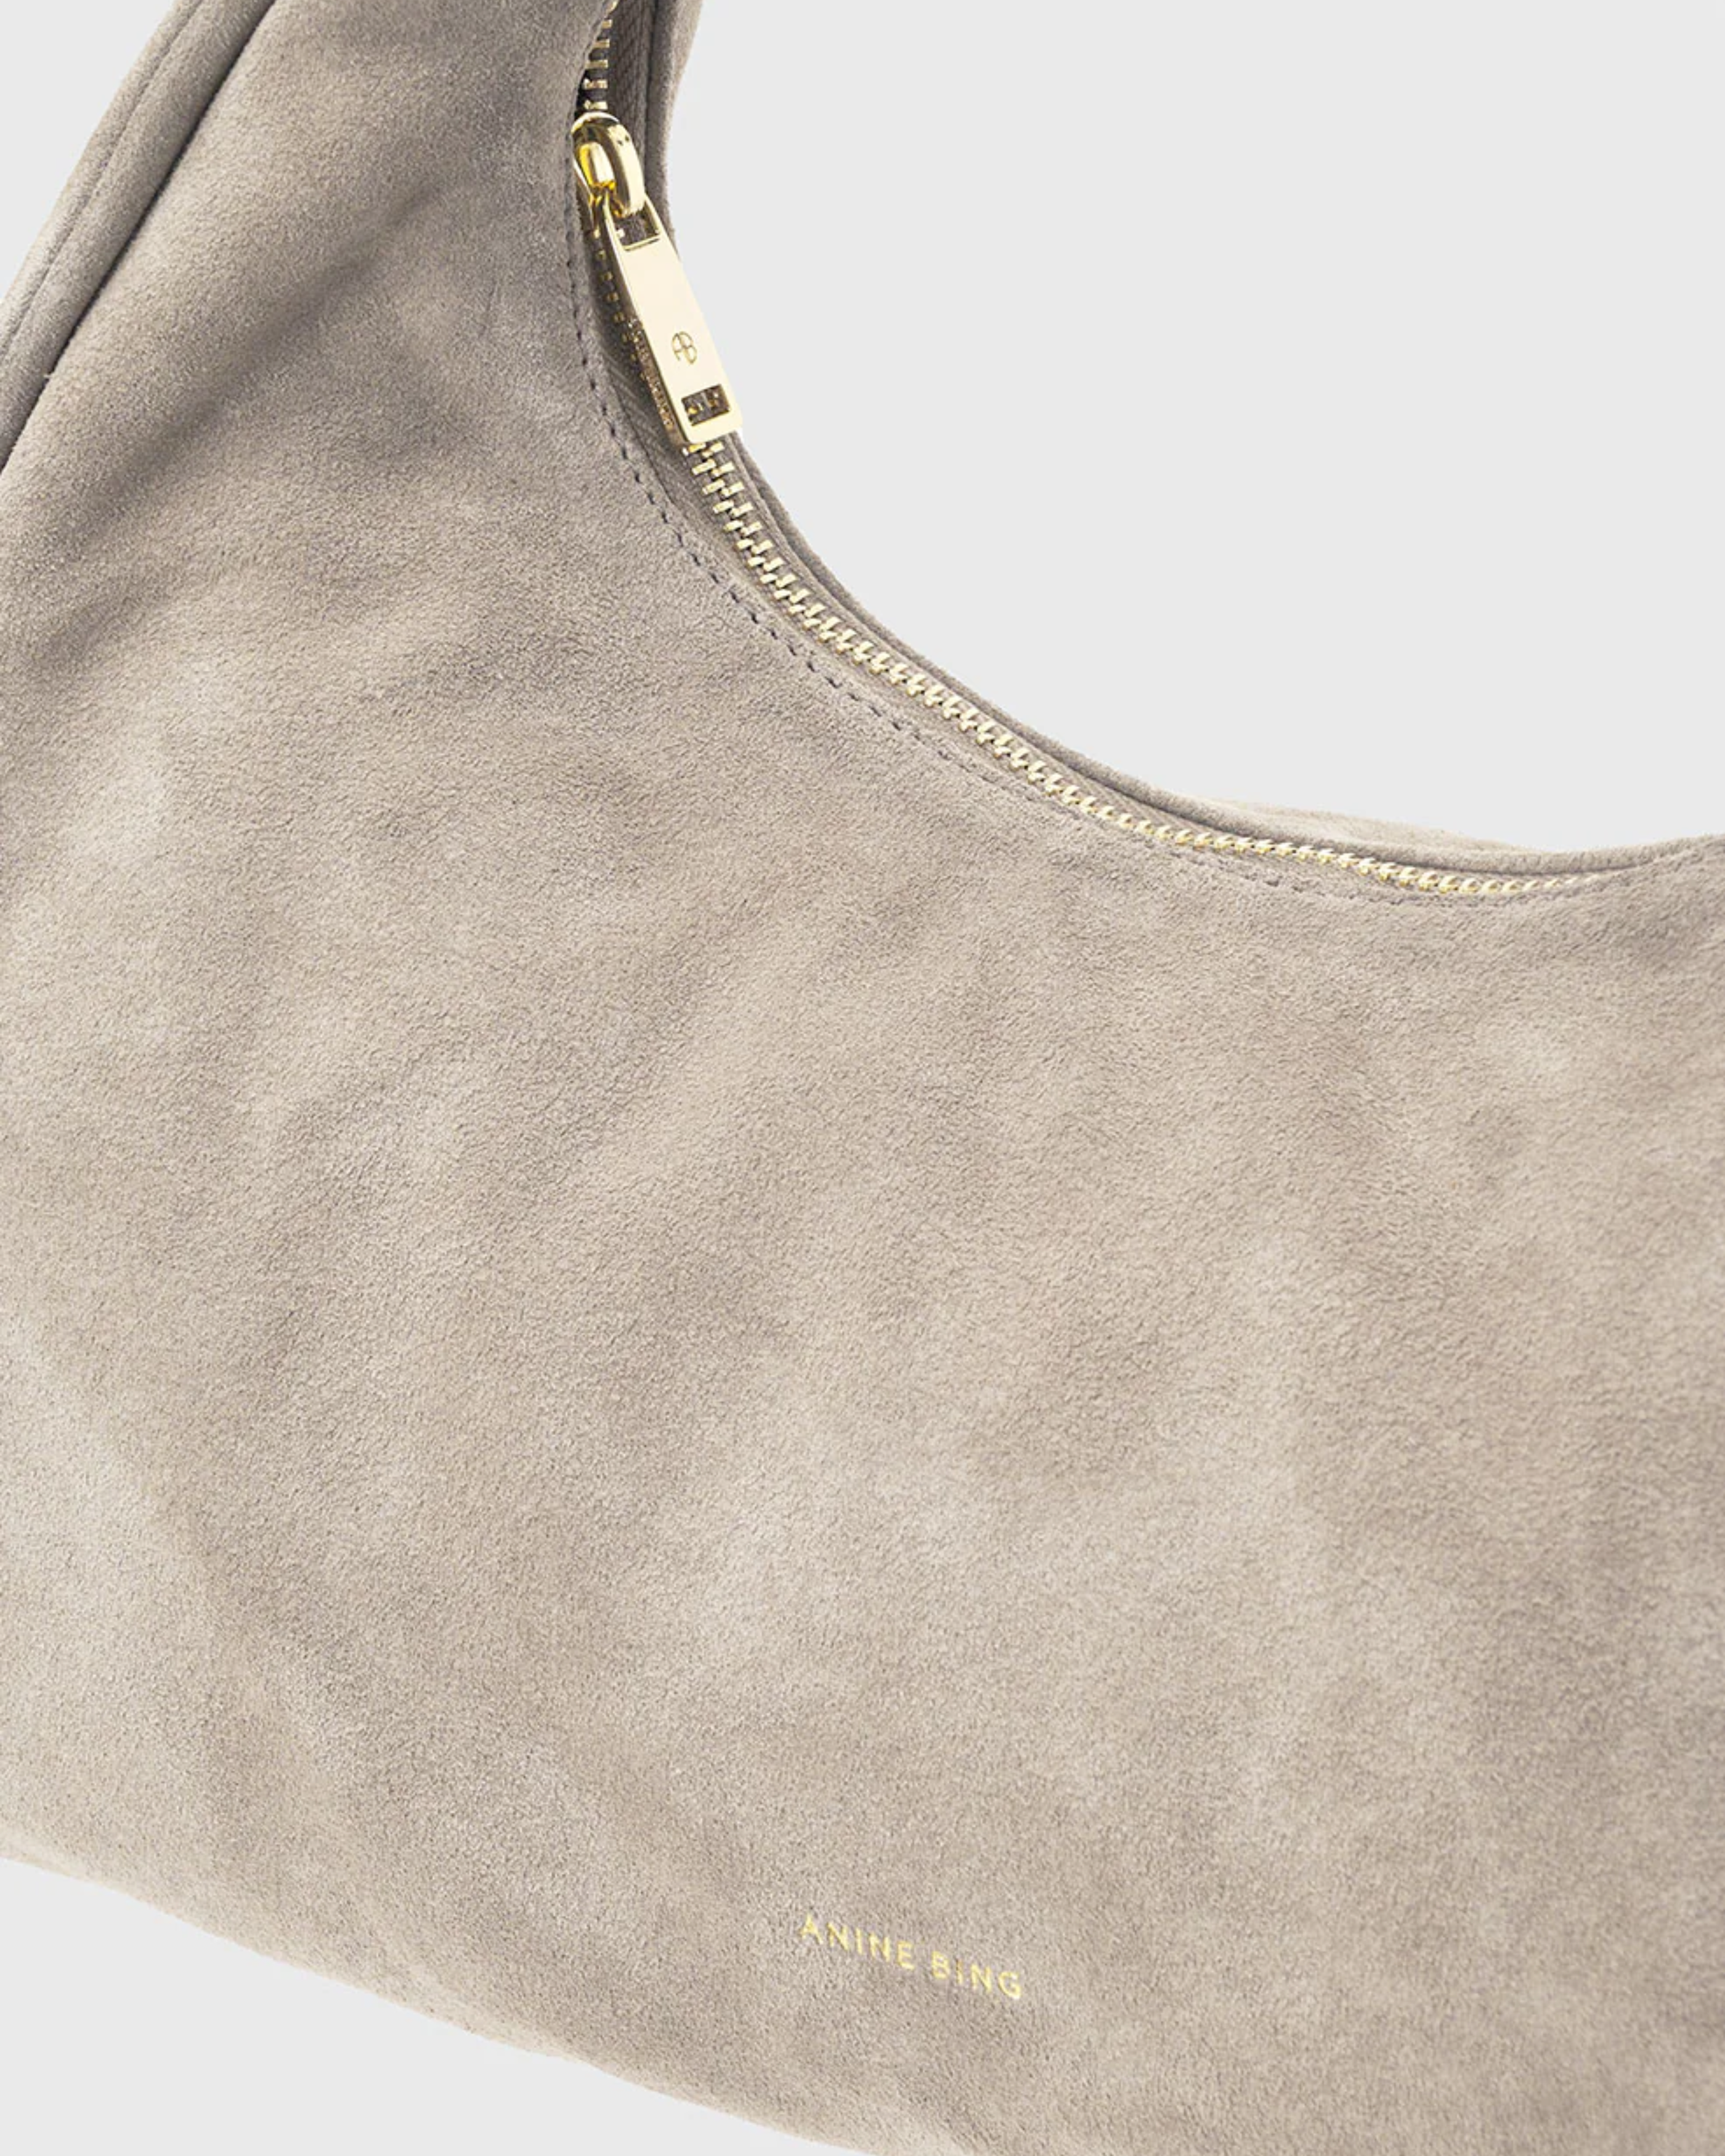 Anine Bing Grace Bag in Taupe Suede